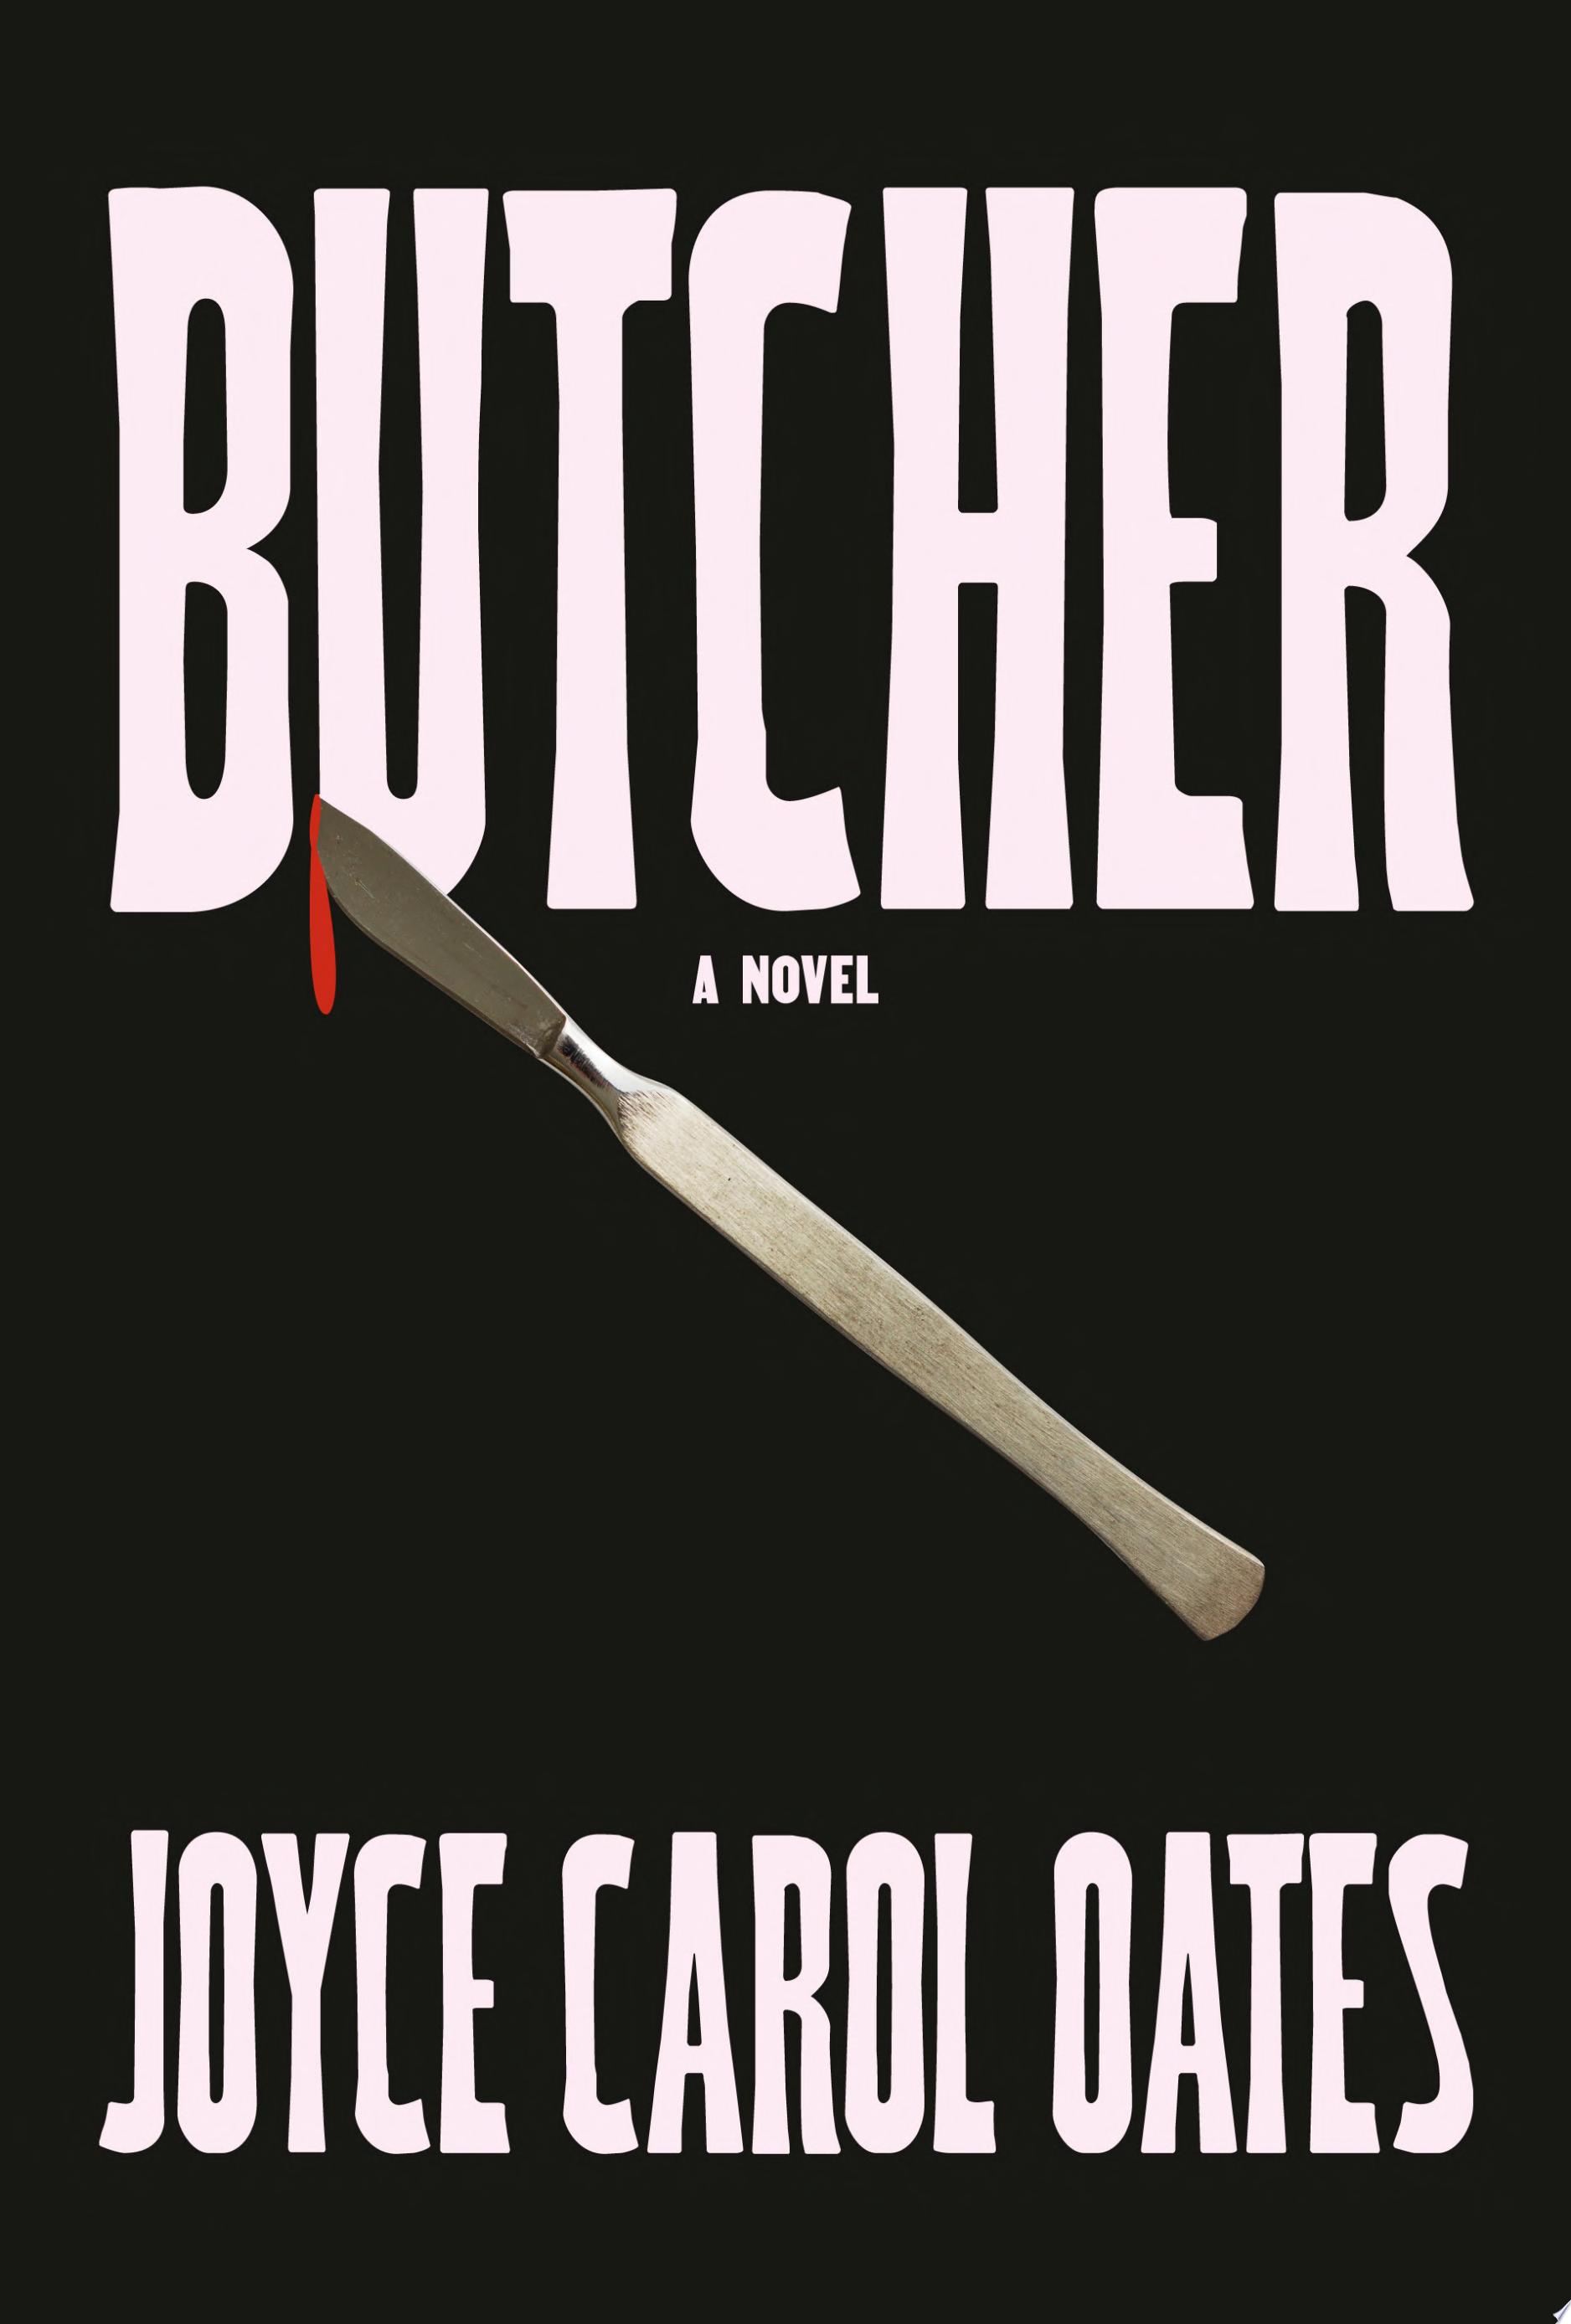 Image for "Butcher"